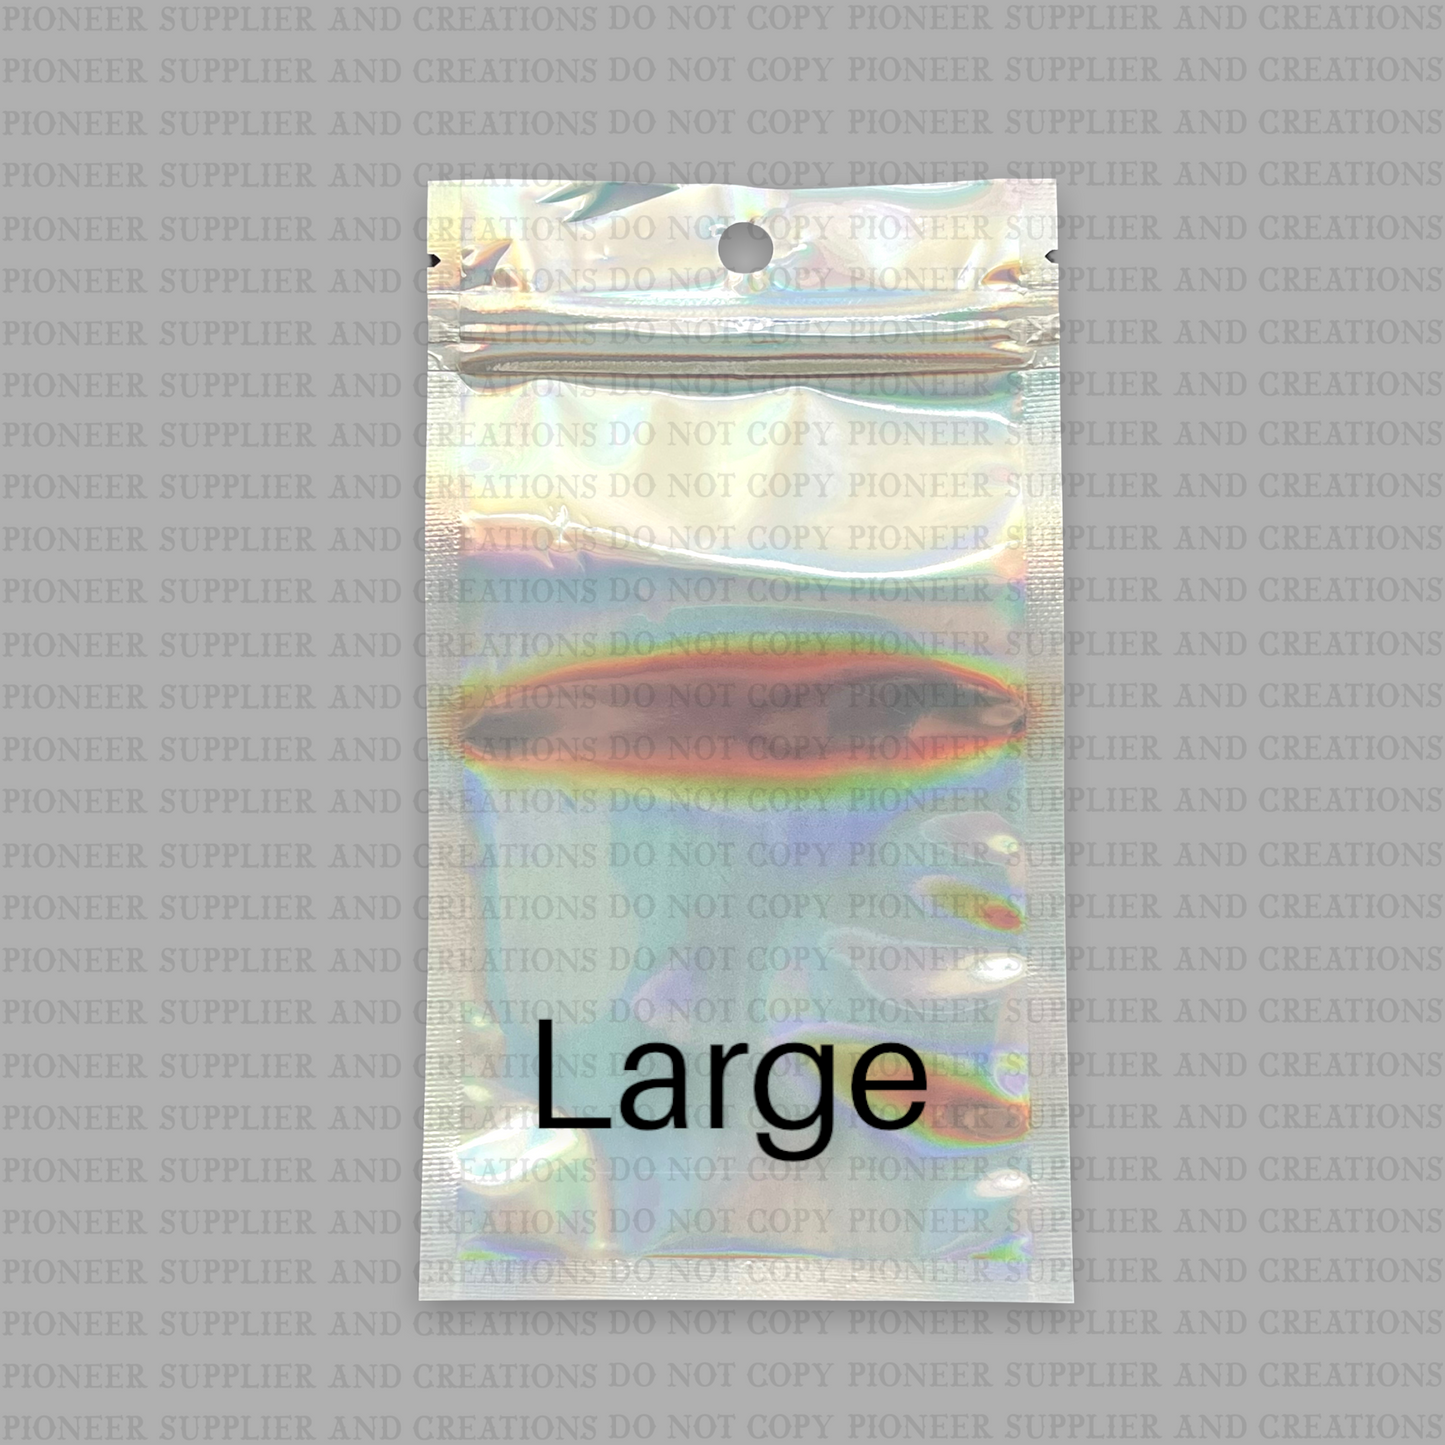 25 Iridescent Holographic Zip Lock Pouches - Pioneer Supplier & Creations